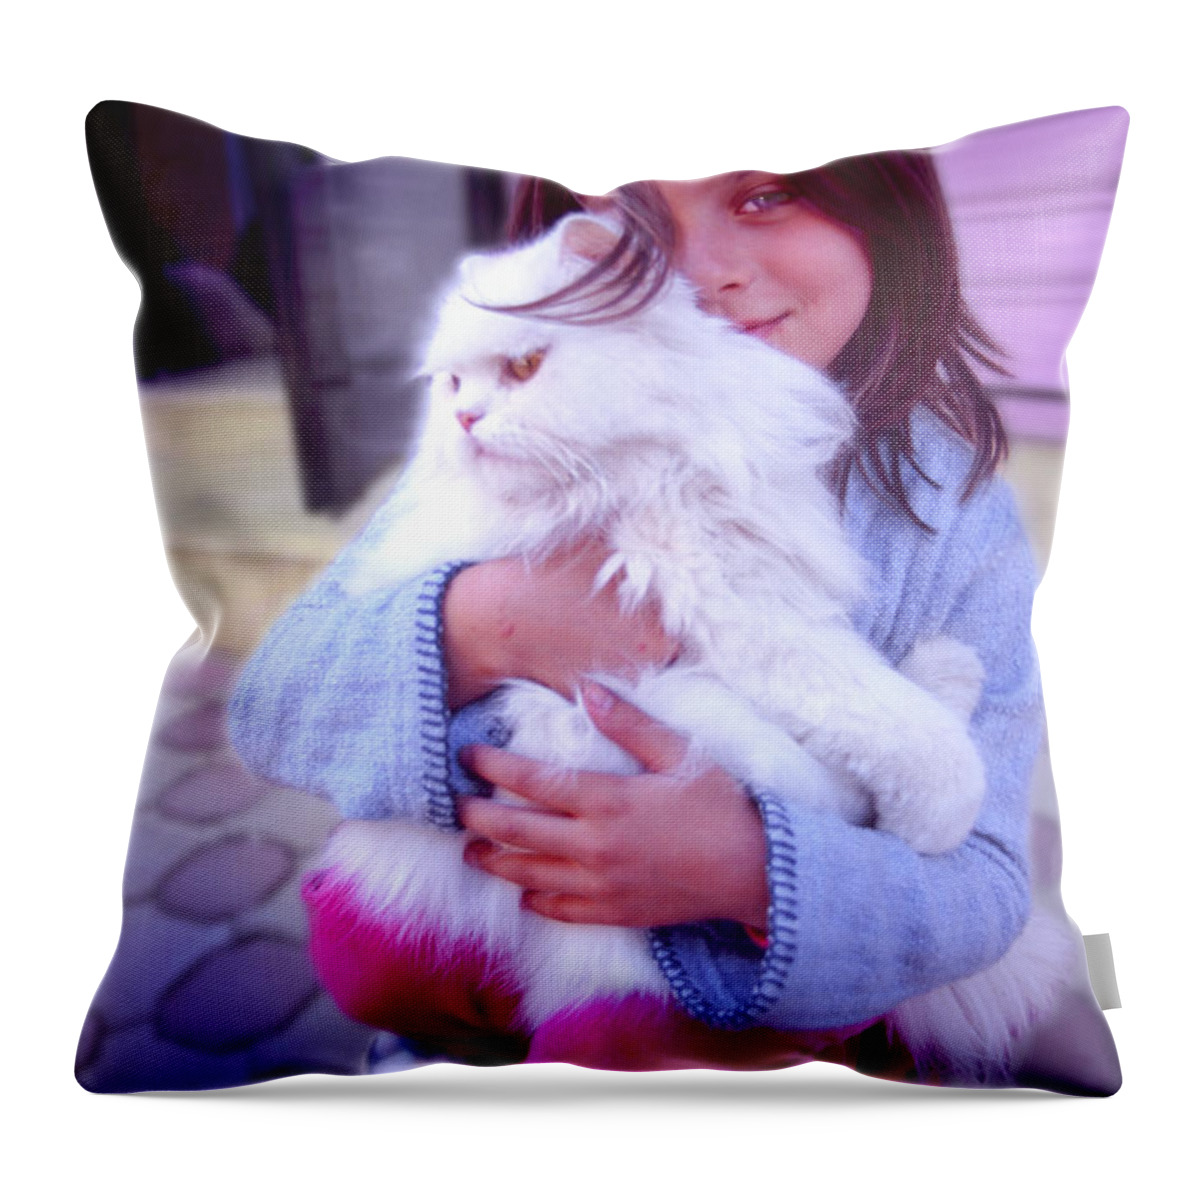 Friends Throw Pillow featuring the photograph Friends by Richard Piper